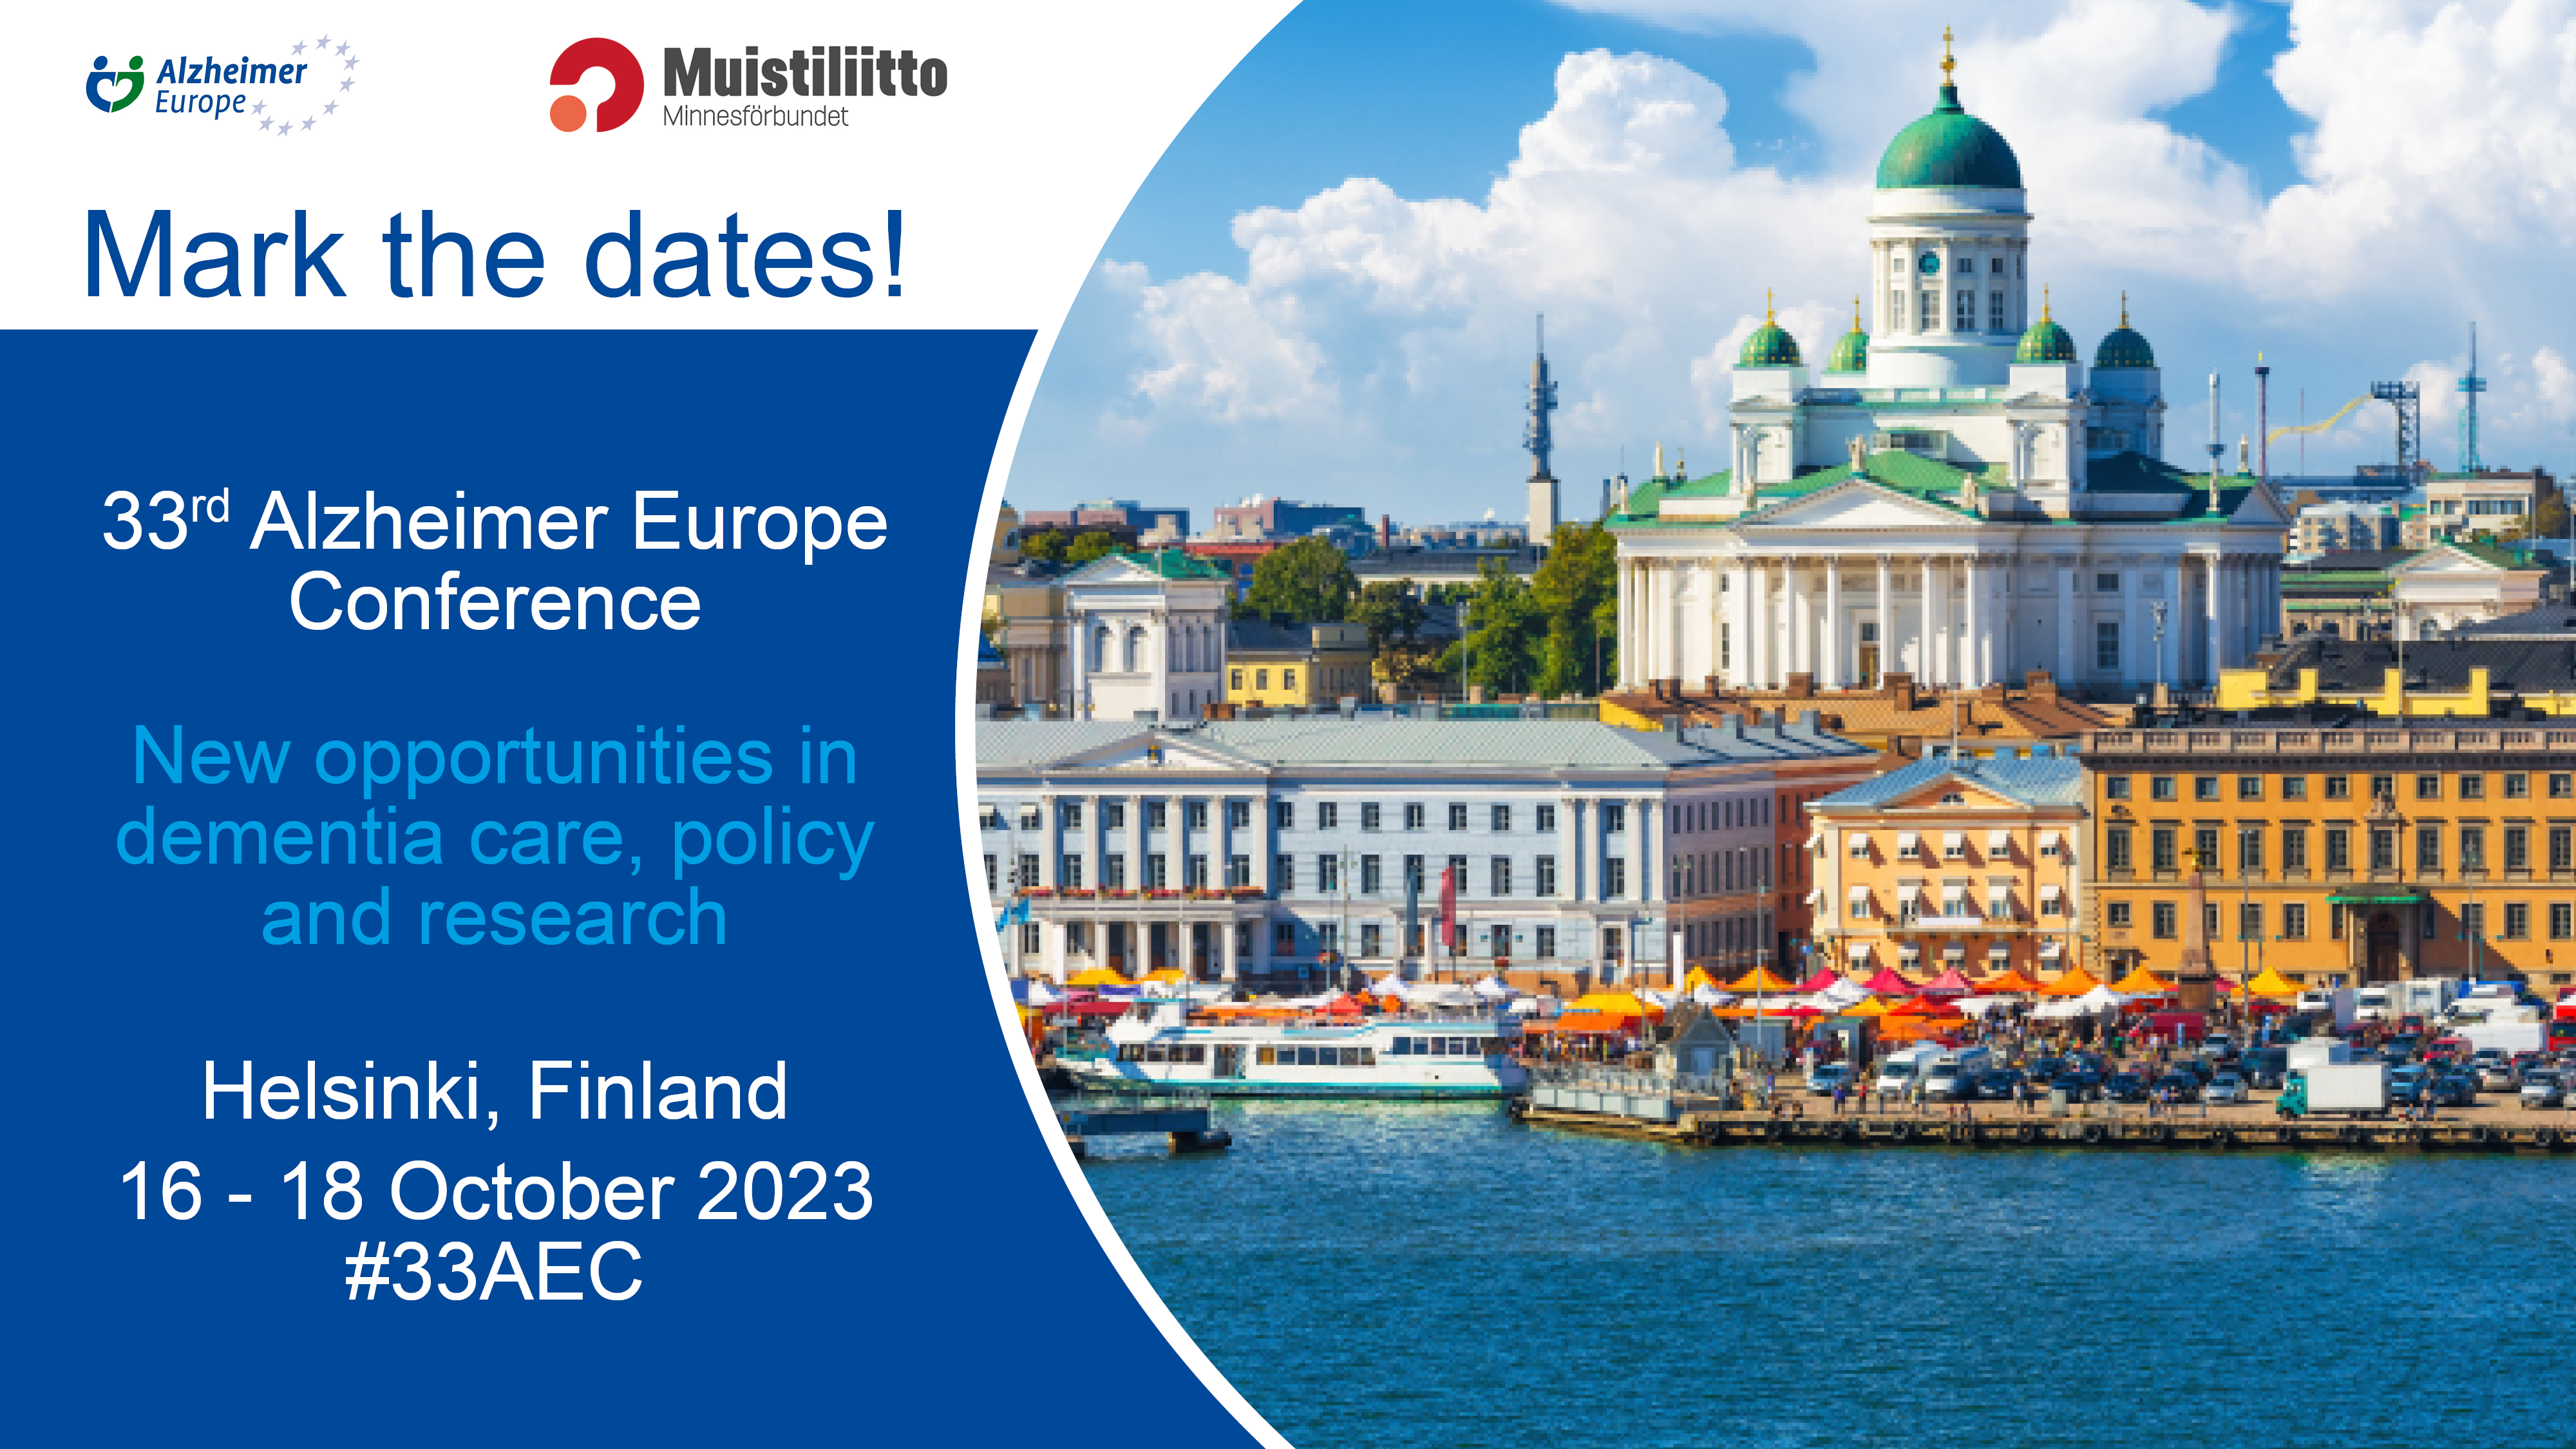 Mark the dates! 33rd Alzheimer Europe Conference. New opportunities in dementia care, policy and research. Helsinki, Finland, 16.-18.10.2023